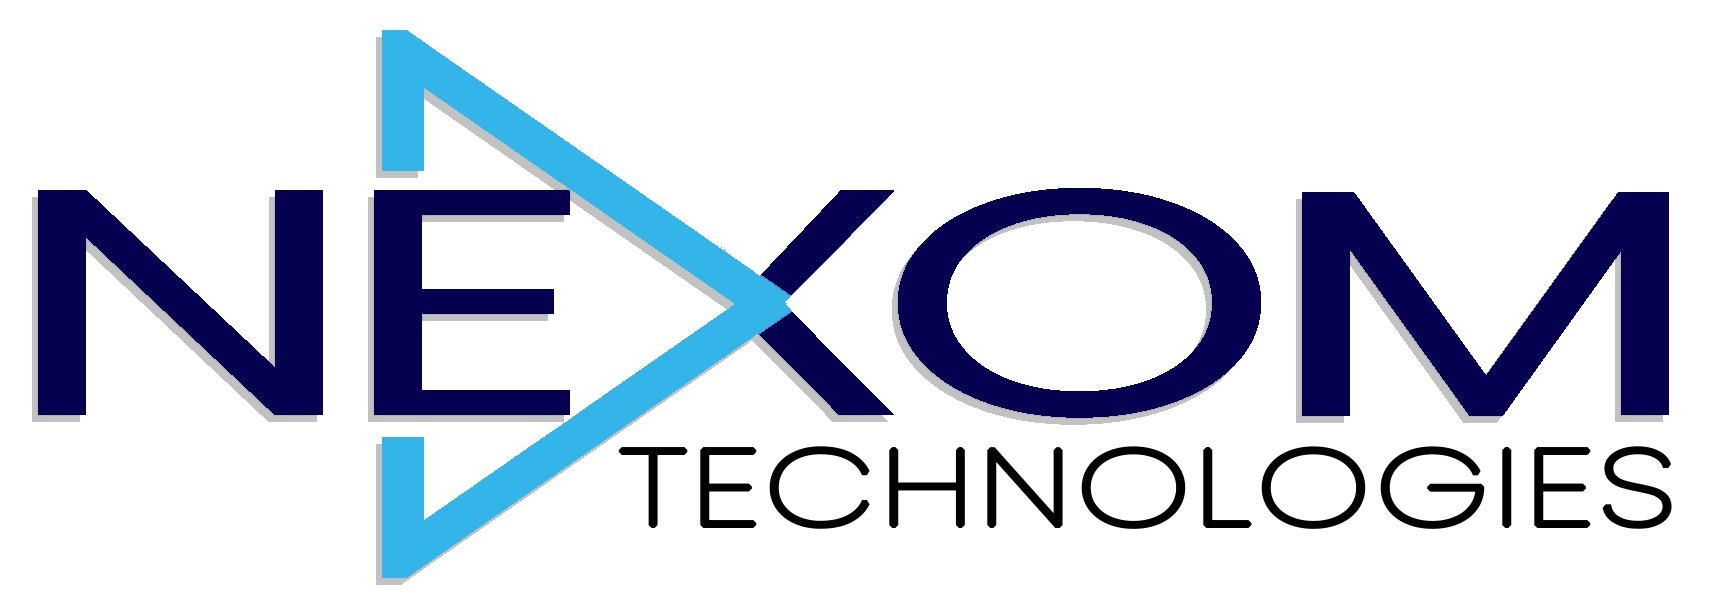 Recruitment Services, Staffing Agency in India | Nexom TechnologiesServicesEverything ElseNoidaNoida Sector 16